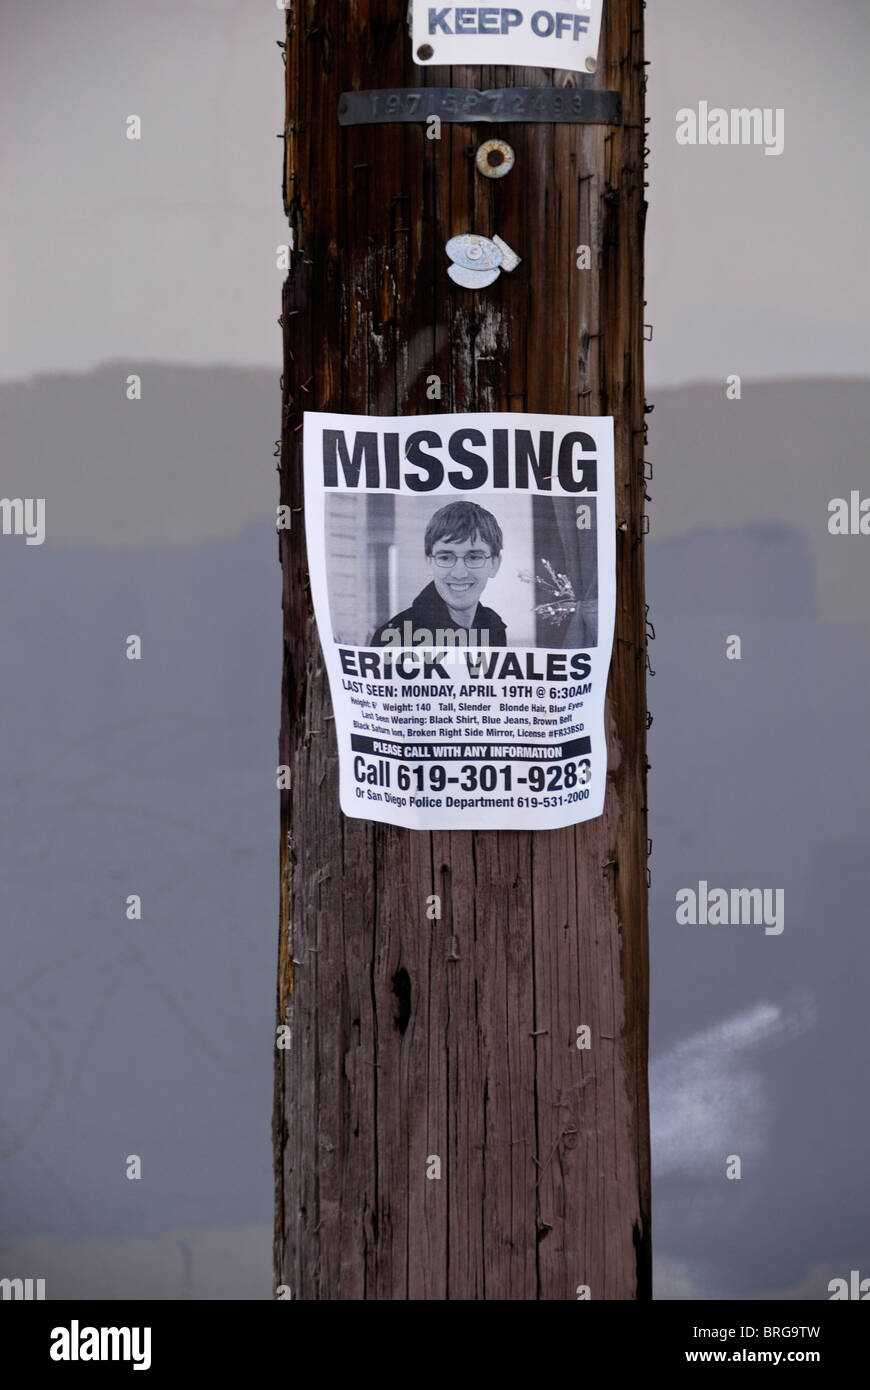 Missing person poster affixed to a utility pole in the Barrio Logan section of San Diego, California Stock Photo